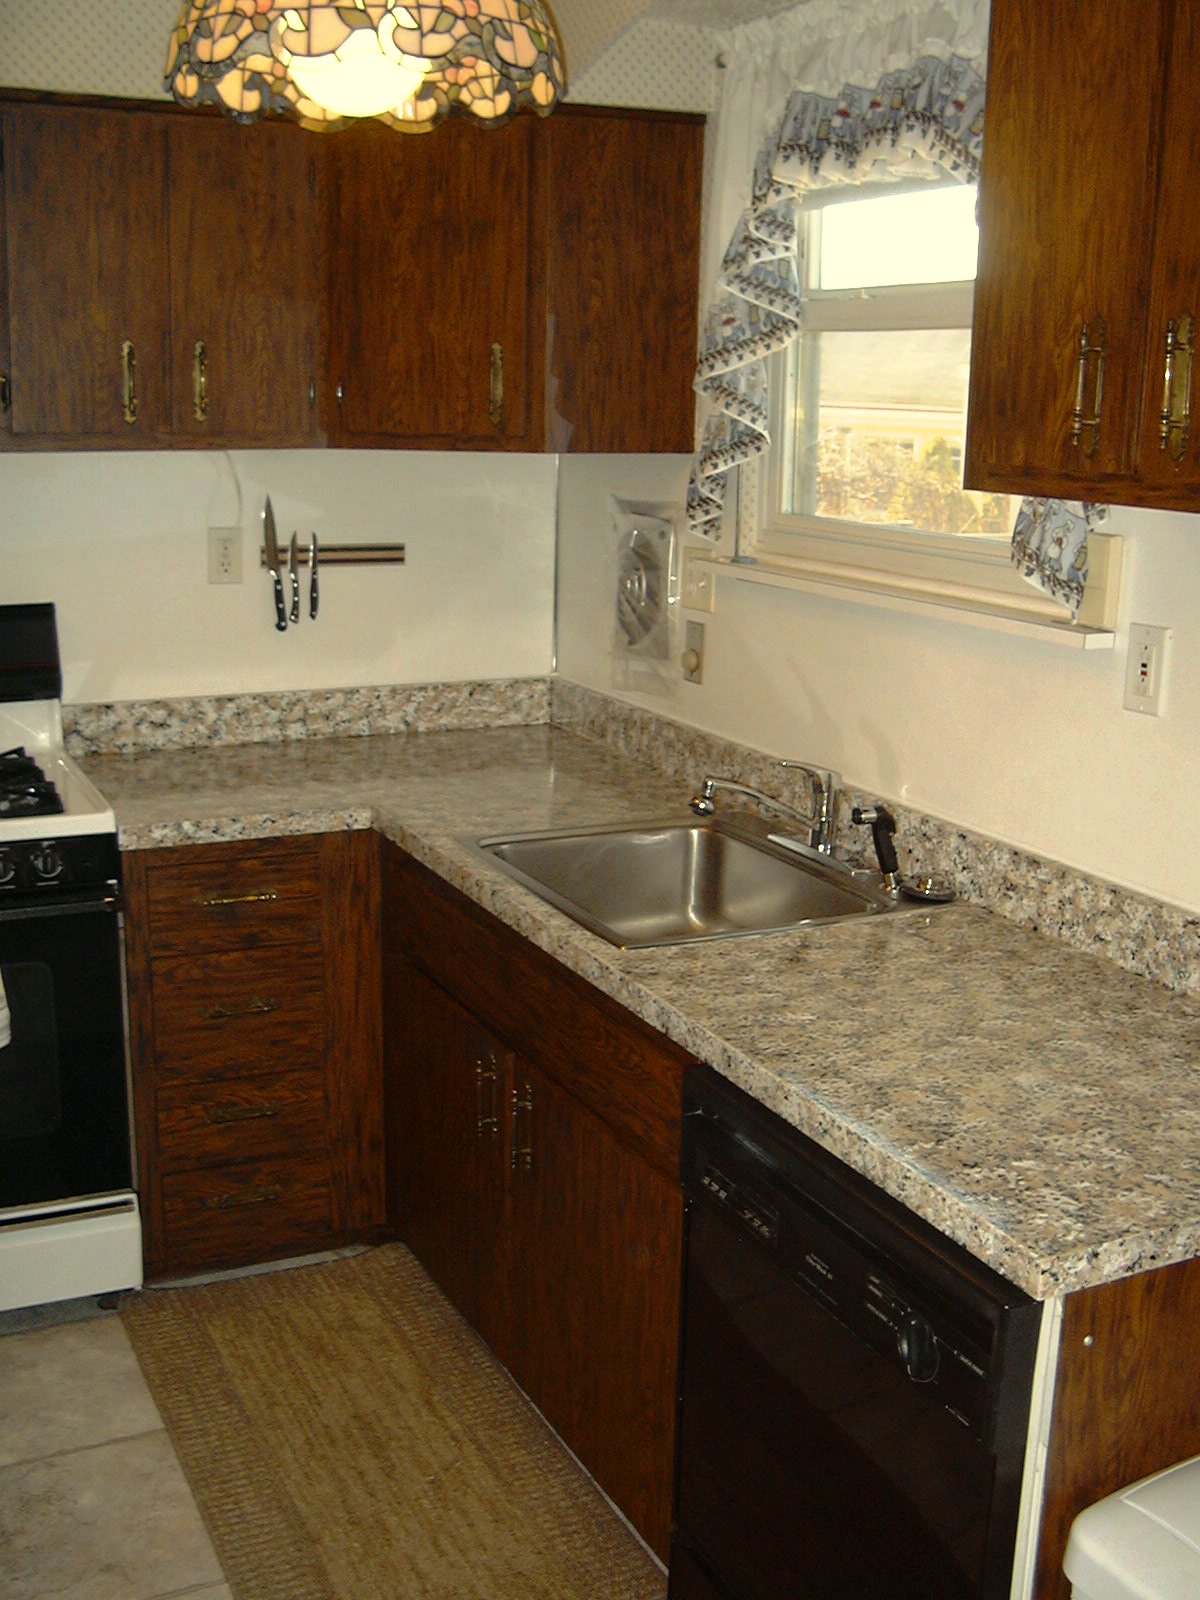 Ken Nect Our Experience With The Giani Granite Countertop Paint